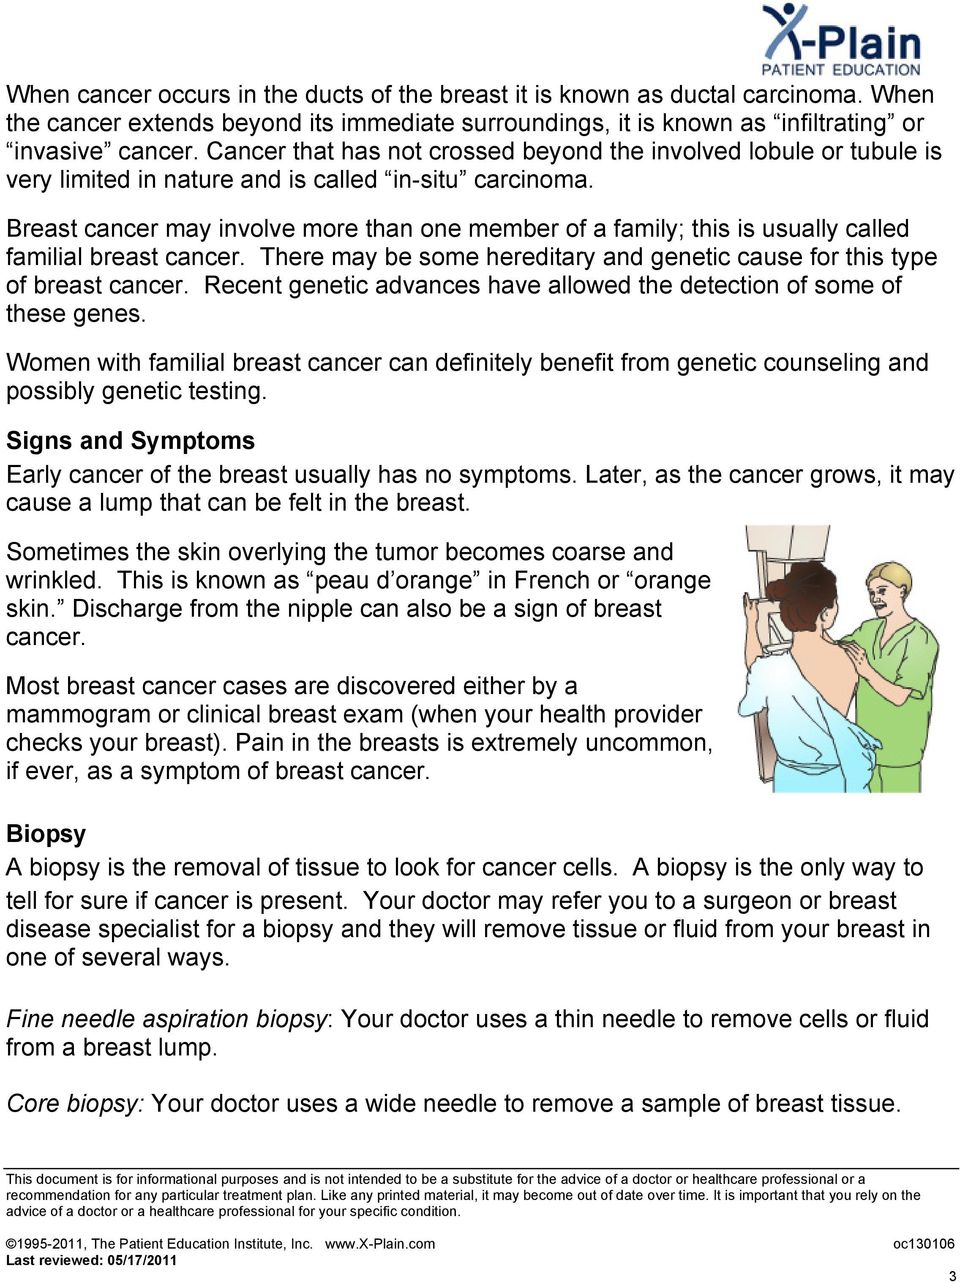 Breast cancer may involve more than one member of a family; this is usually called familial breast cancer. There may be some hereditary and genetic cause for this type of breast cancer.